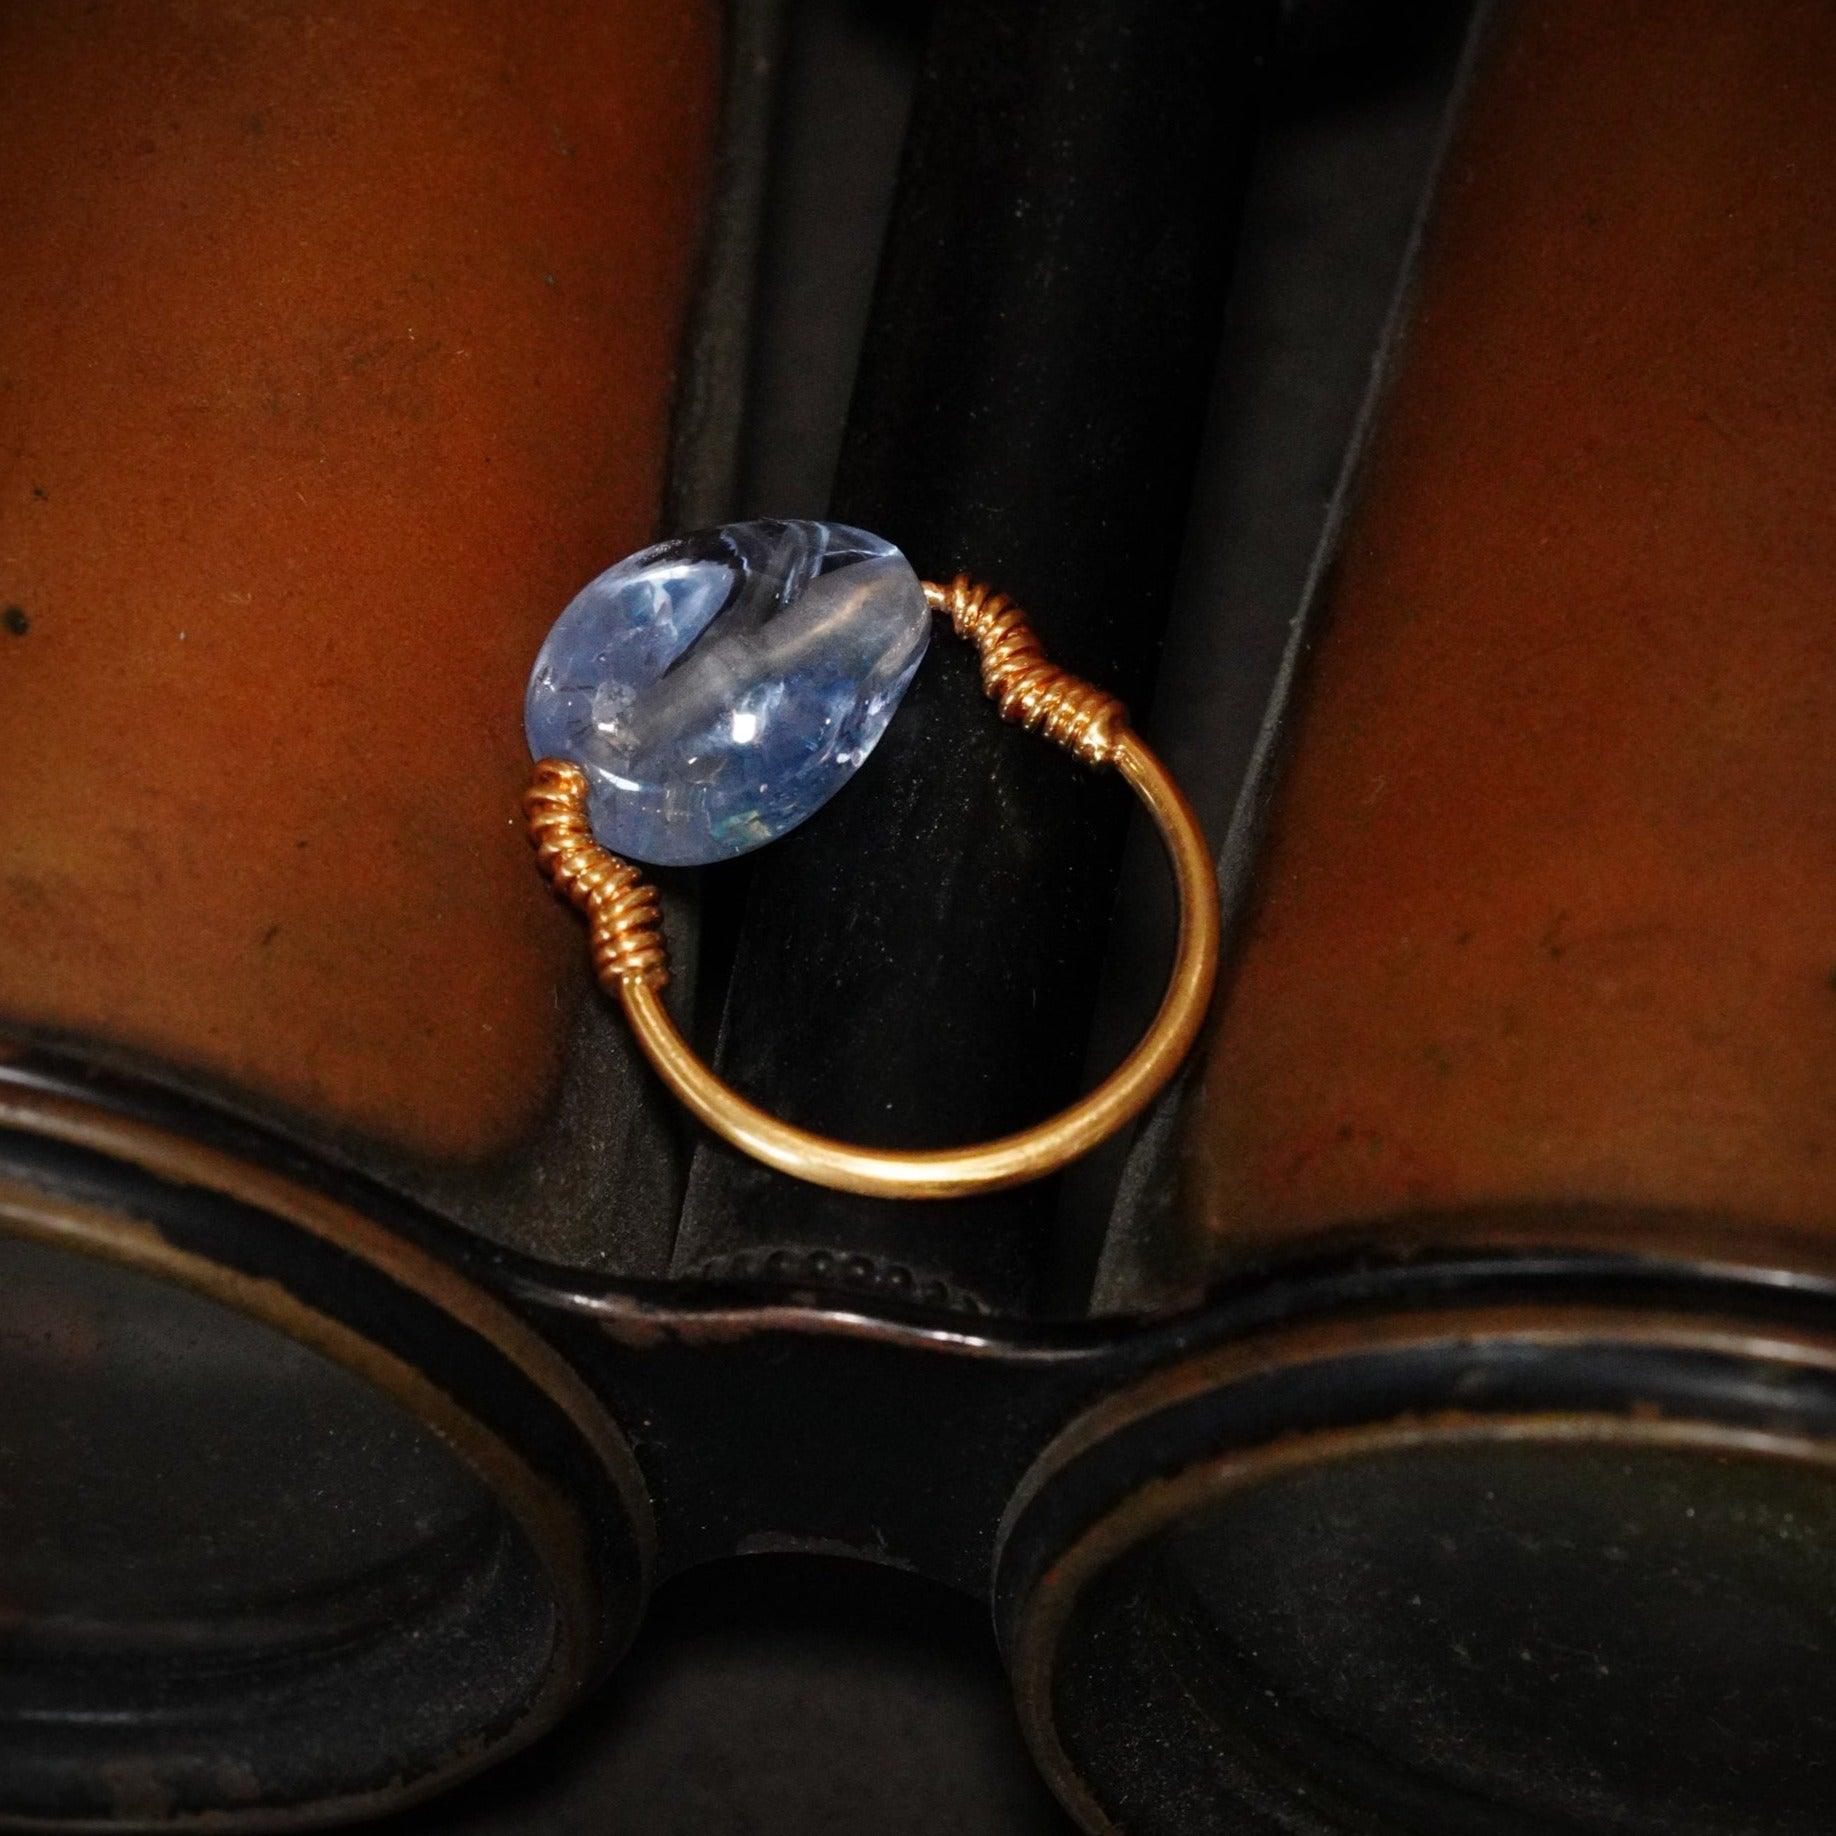 Handcrafted Ceylon 9 CT Sapphire Bead Ring in 18K Gold by Jogani - Anup Jogani Design